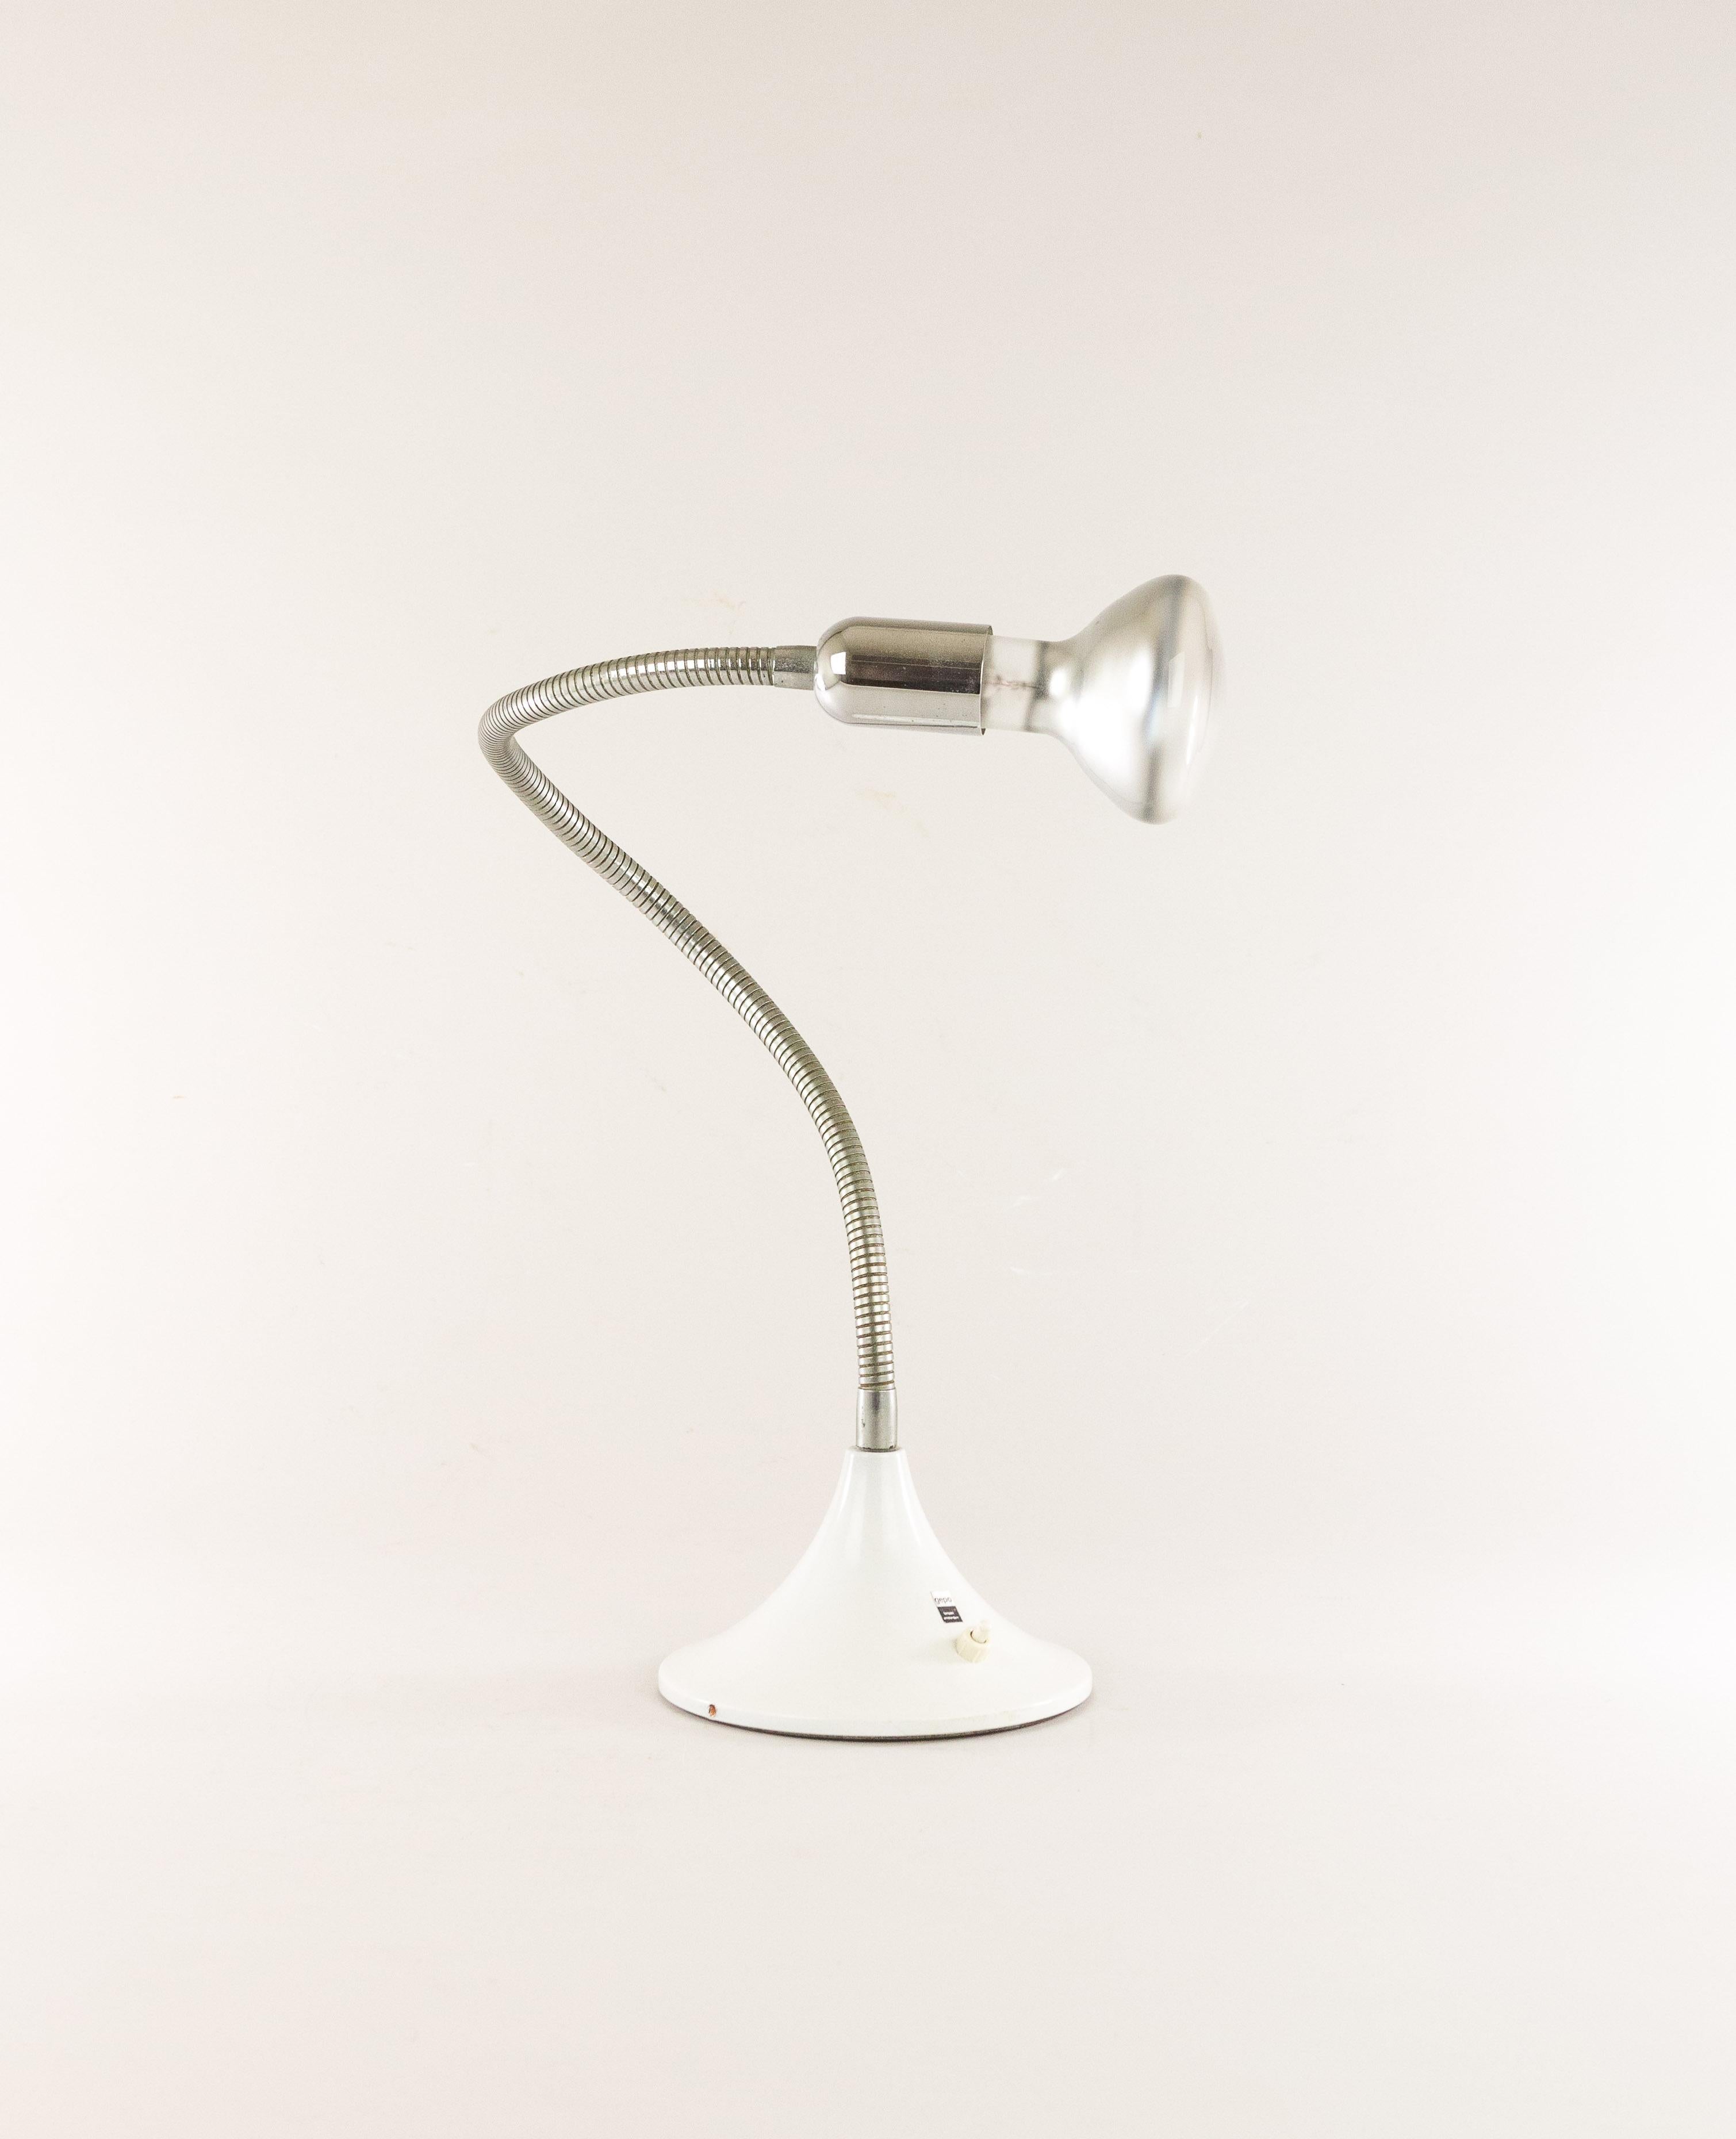 Adjustable lamp by Gepo, from most probably the 1970s. As visible on the photos the lamp can be used as a wall lamp and as a table lamp.

Gepo was a family business founded in 1965 by four brothers. The name Gepo is a contraction of the first two